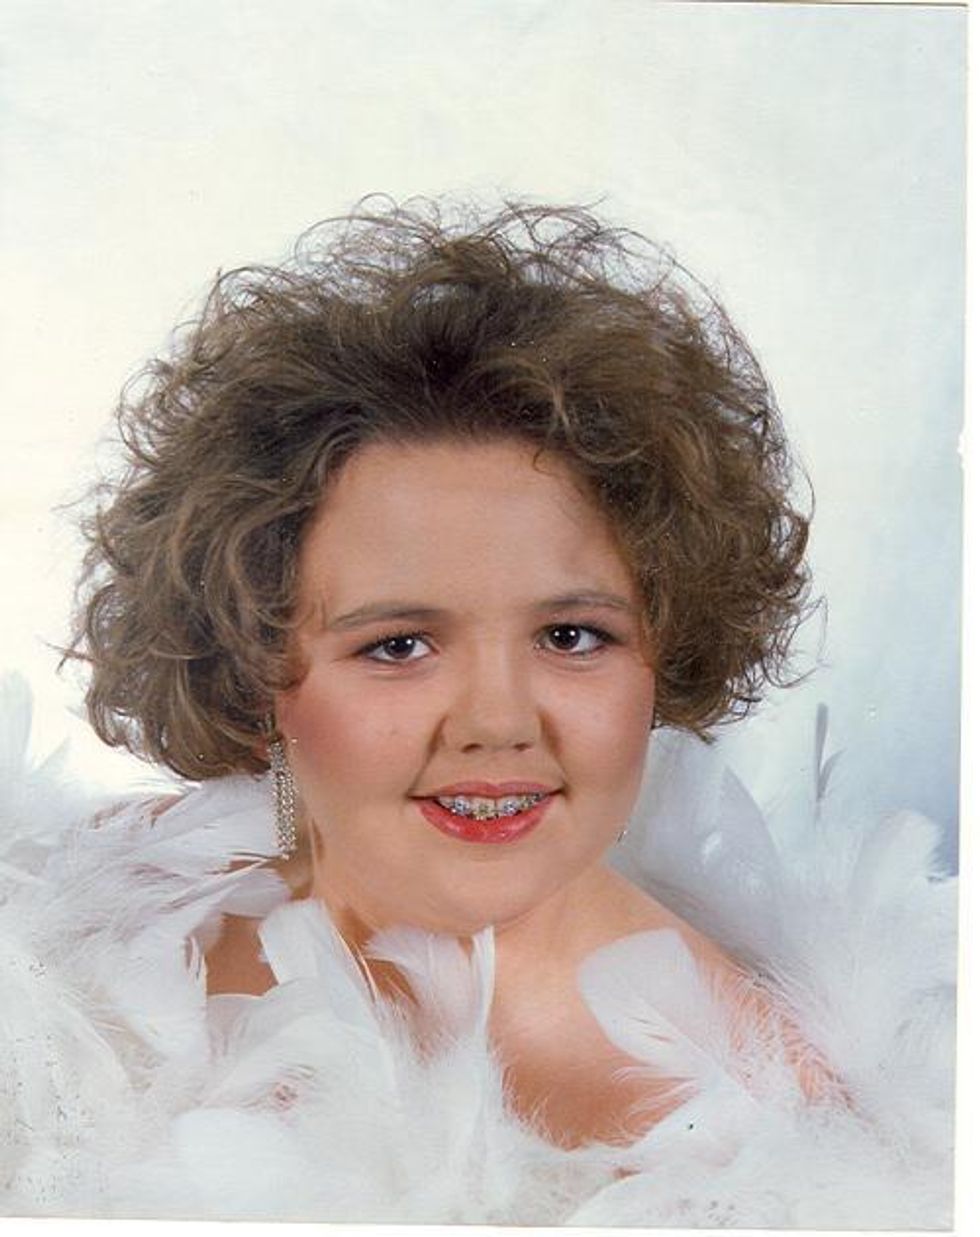 35 Awesomely Awkward Glamour Shots That Cannot Be Unseen 22 Words